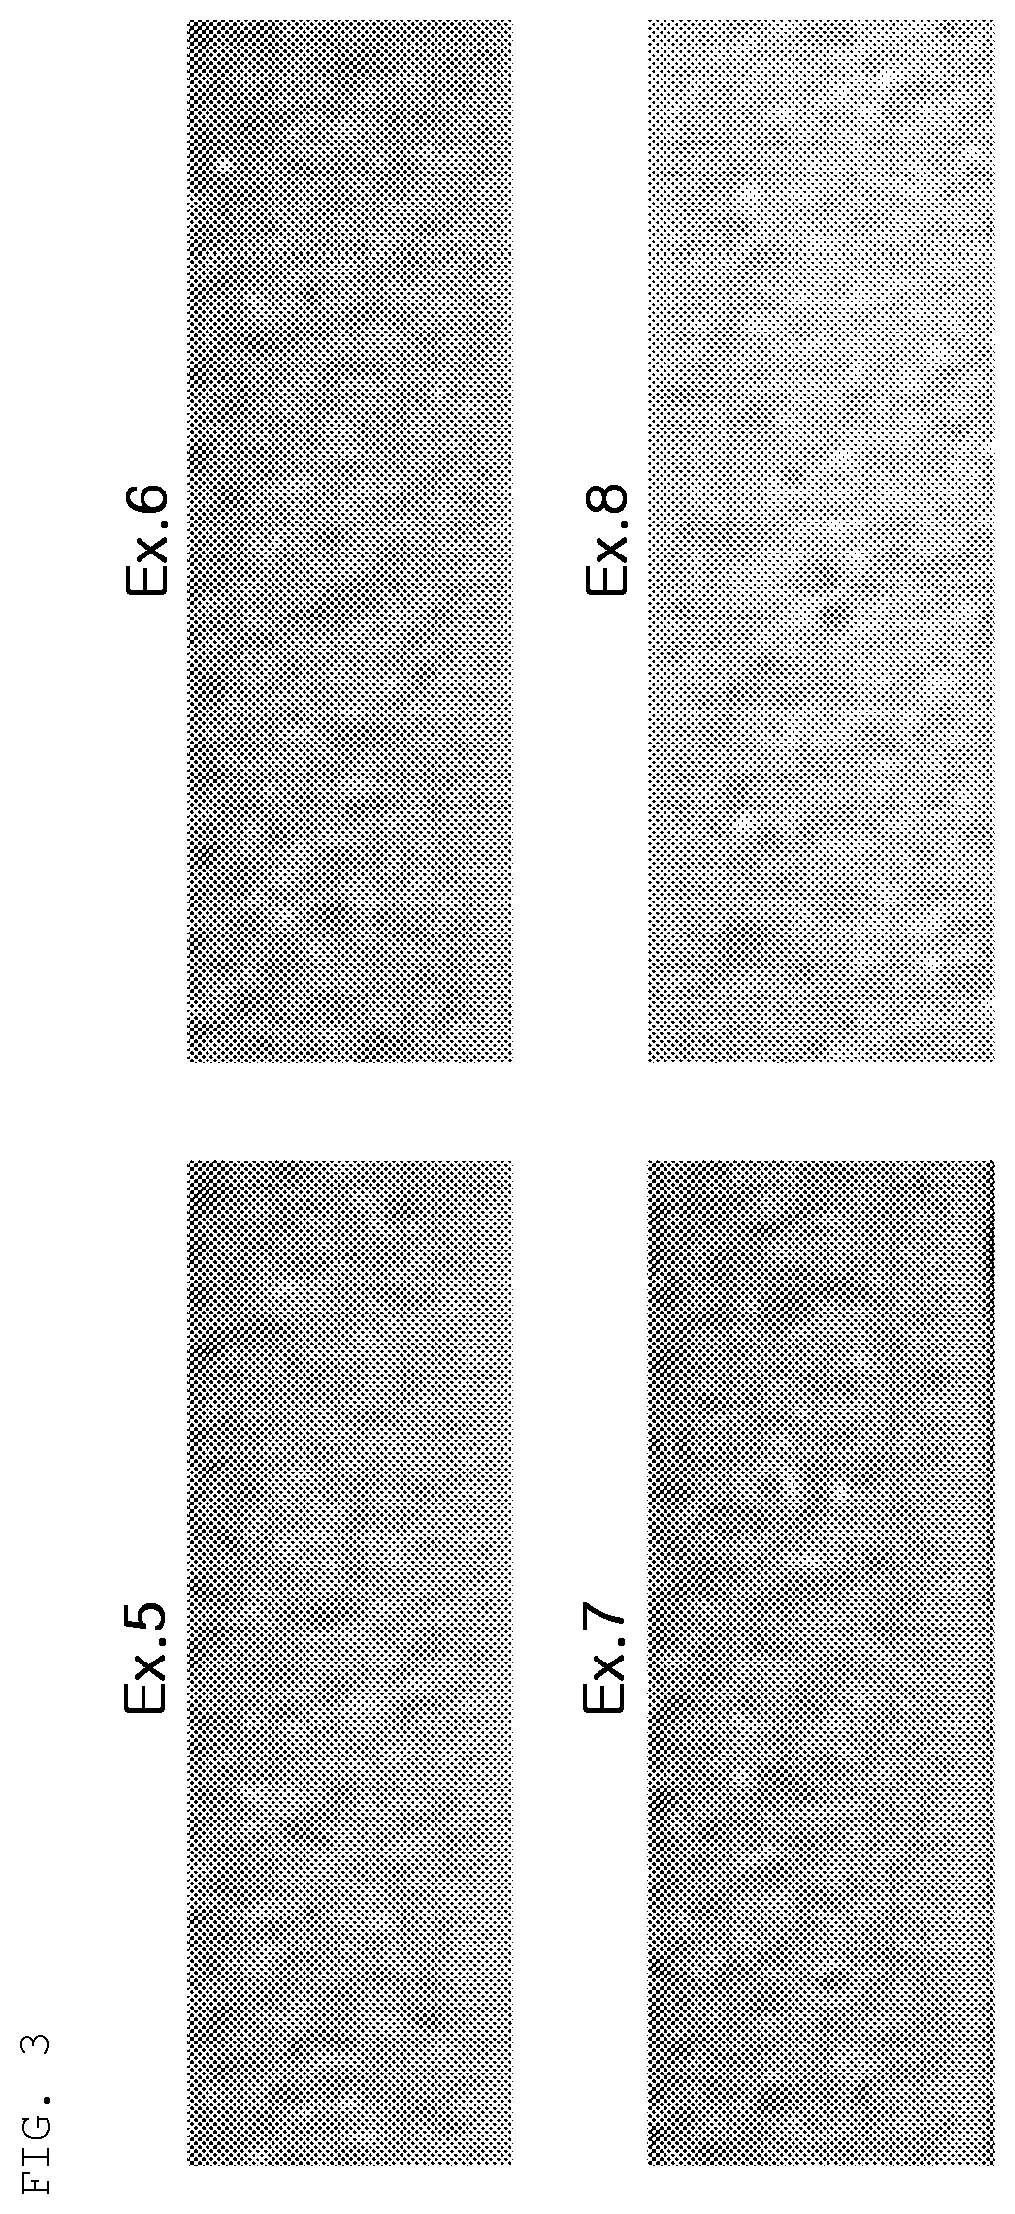 Composition for preparing vinyl chloride-based polymer and method for preparing vinyl chloride-based polymer using the same